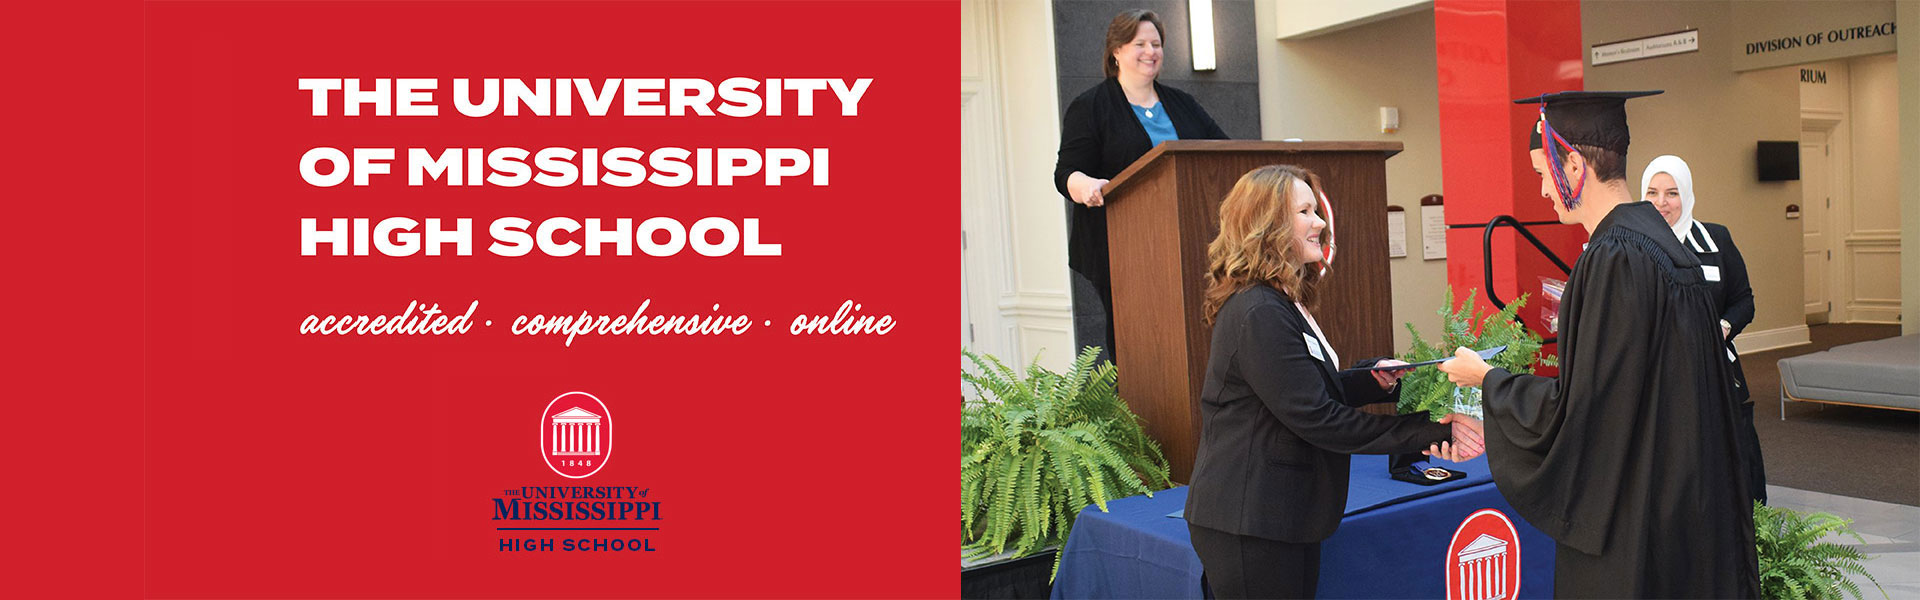 The University of Mississippi High School. Accredited. Comprehensive. Online.